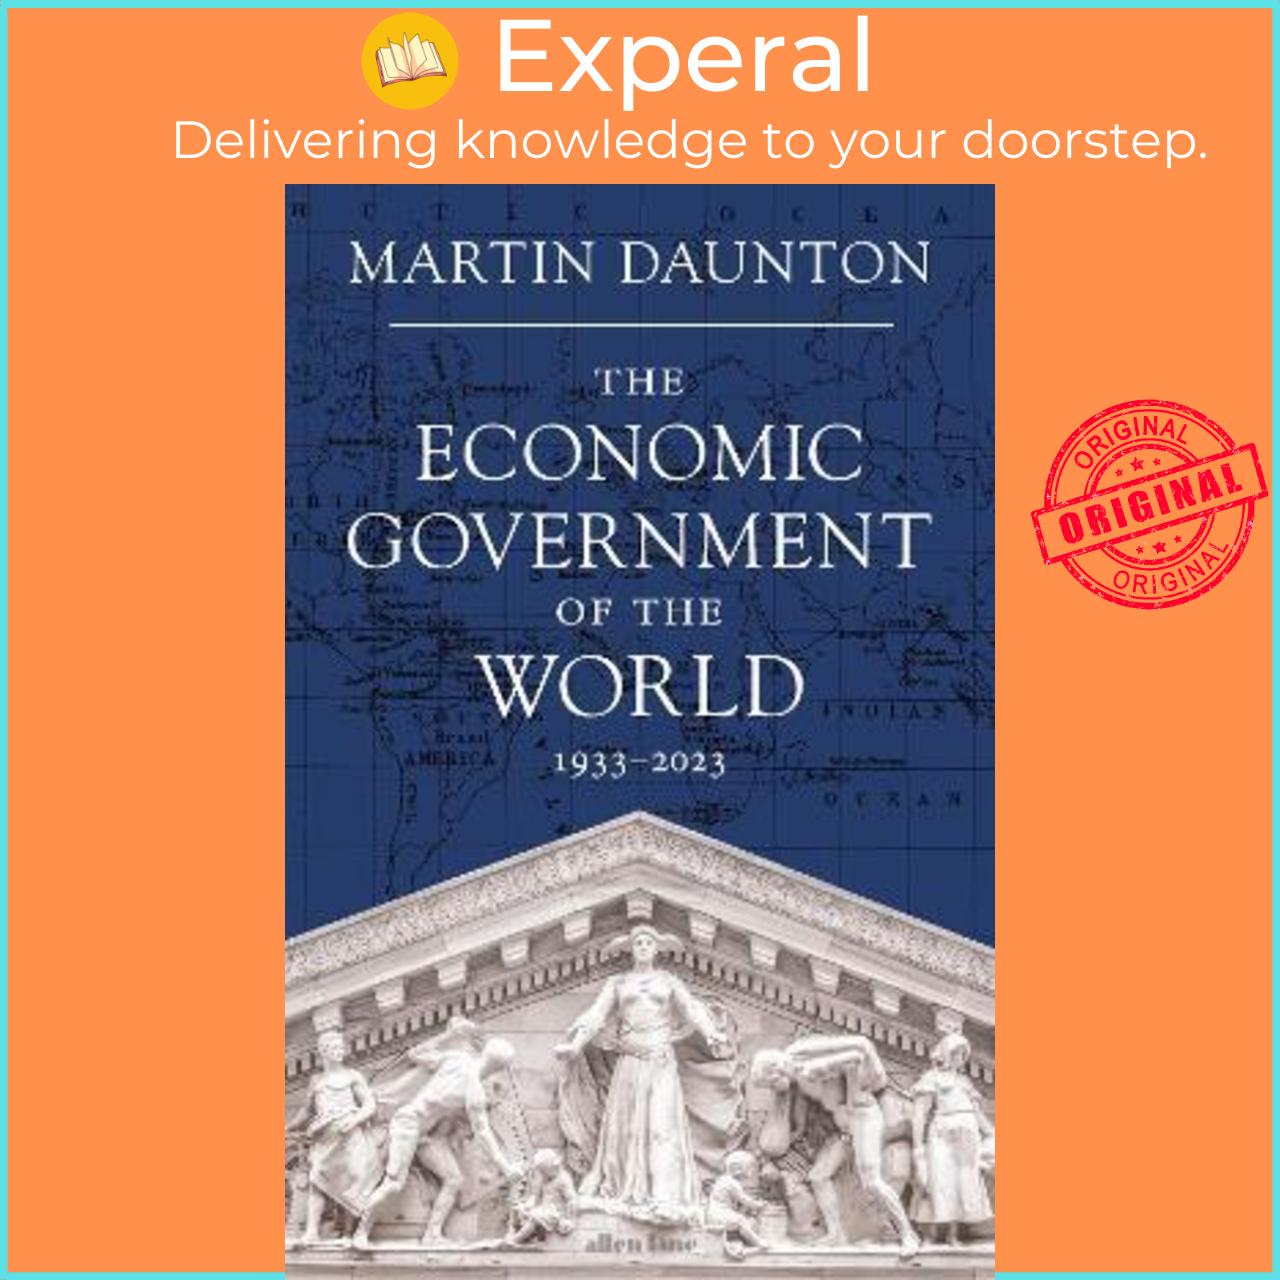 Sách - The Economic Government of the World : 1933-2023 by Martin Daunton (UK edition, hardcover)